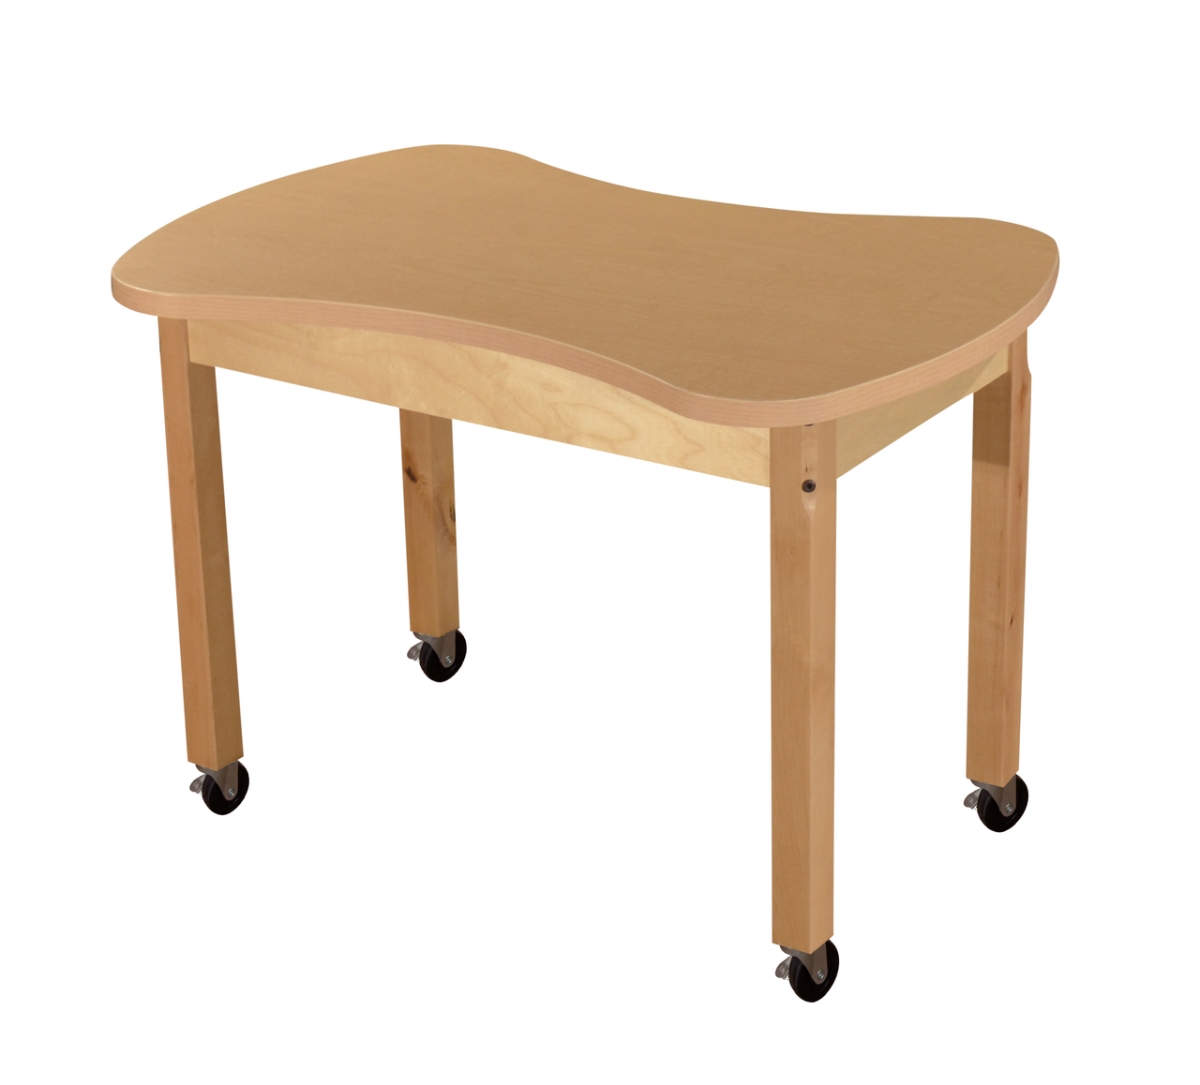 Picture of Wood Designs HPL2436C22C6 24 x 36 in. Mobile Synergy Junction, High Pressure Laminate Table with Hardwood Legs- 22 in.